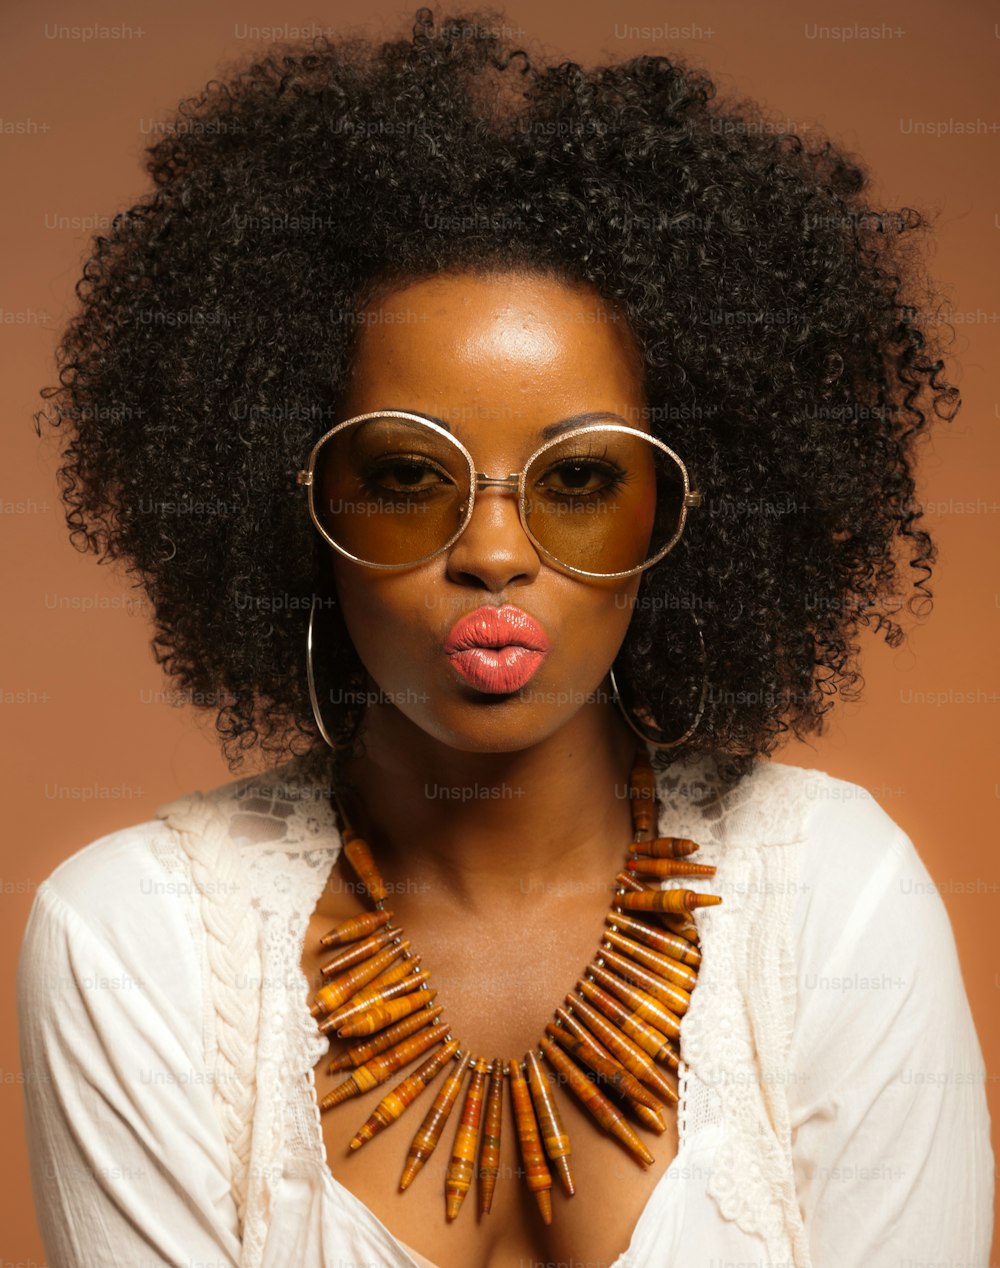 Retro 70s fashion black woman with sunglasses and white shirt. Brown background.